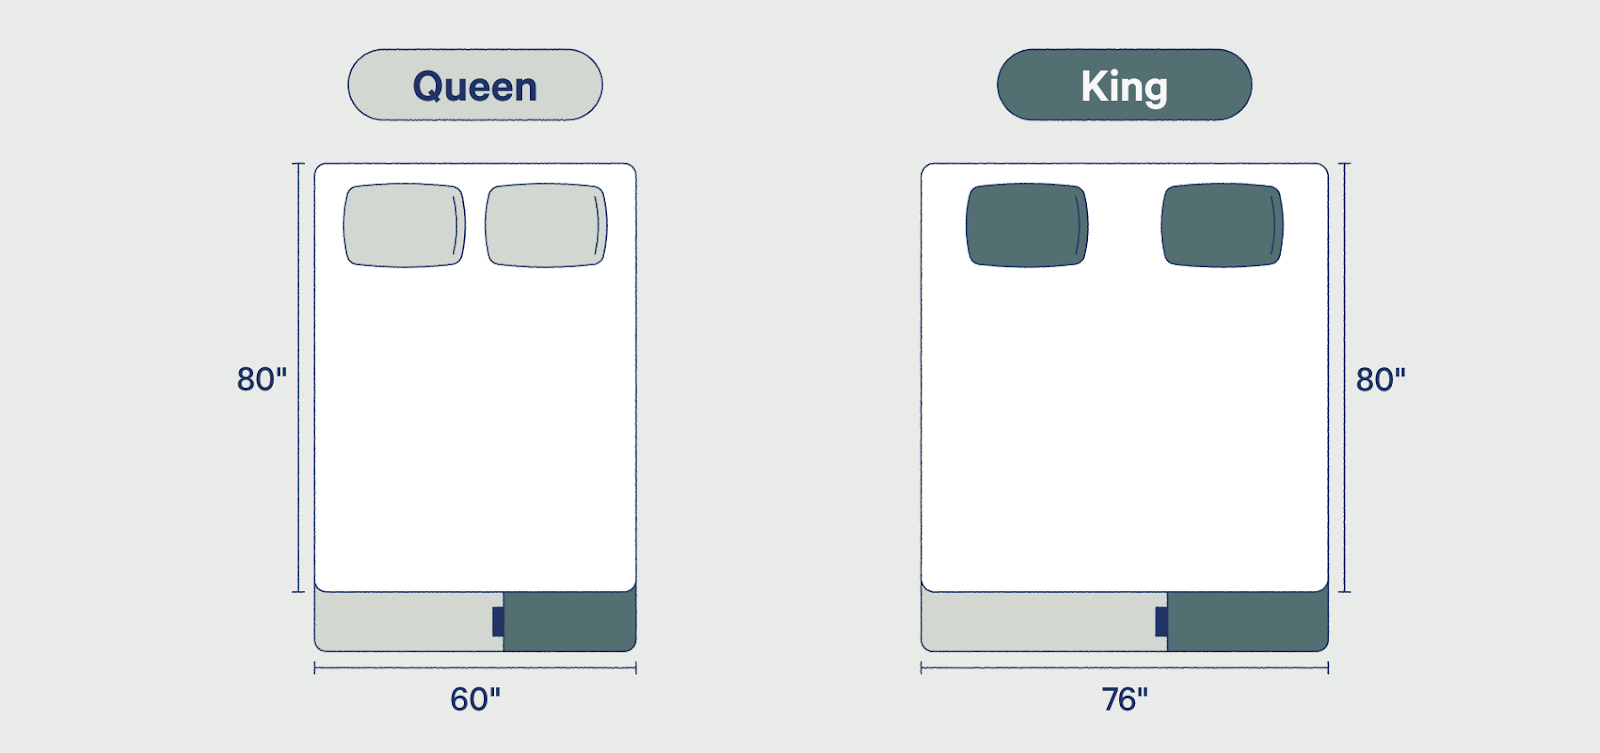 King Vs Queen Bed Size And Comparison, Dimensions Of A Regular King Size Bed